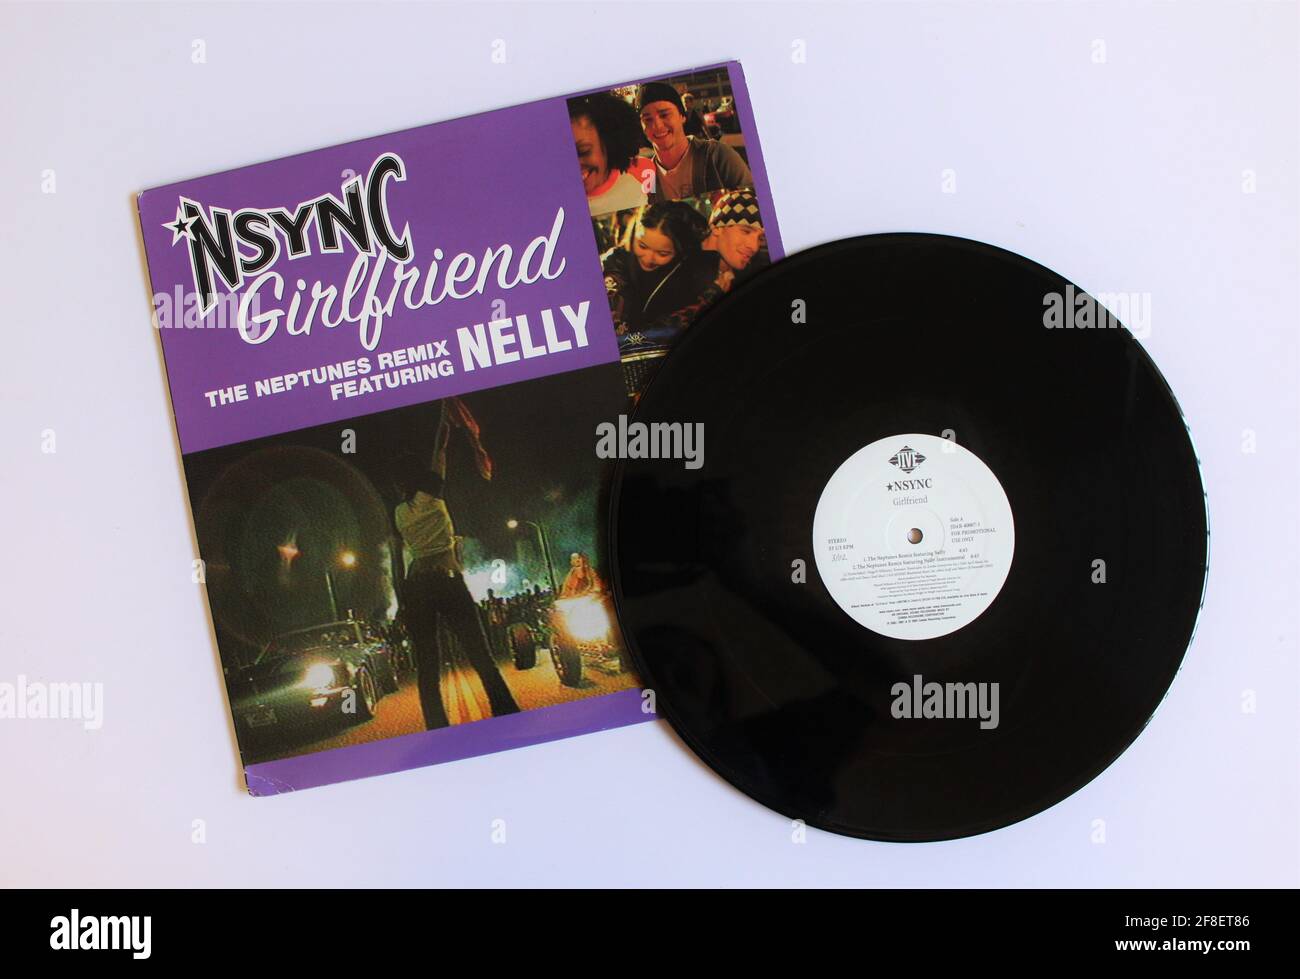 Hop hop, pop, Rnb band single by NSYNC featuring Nelly music album on vinyl record LP disc. Titled: Girlfriend Stock Photo